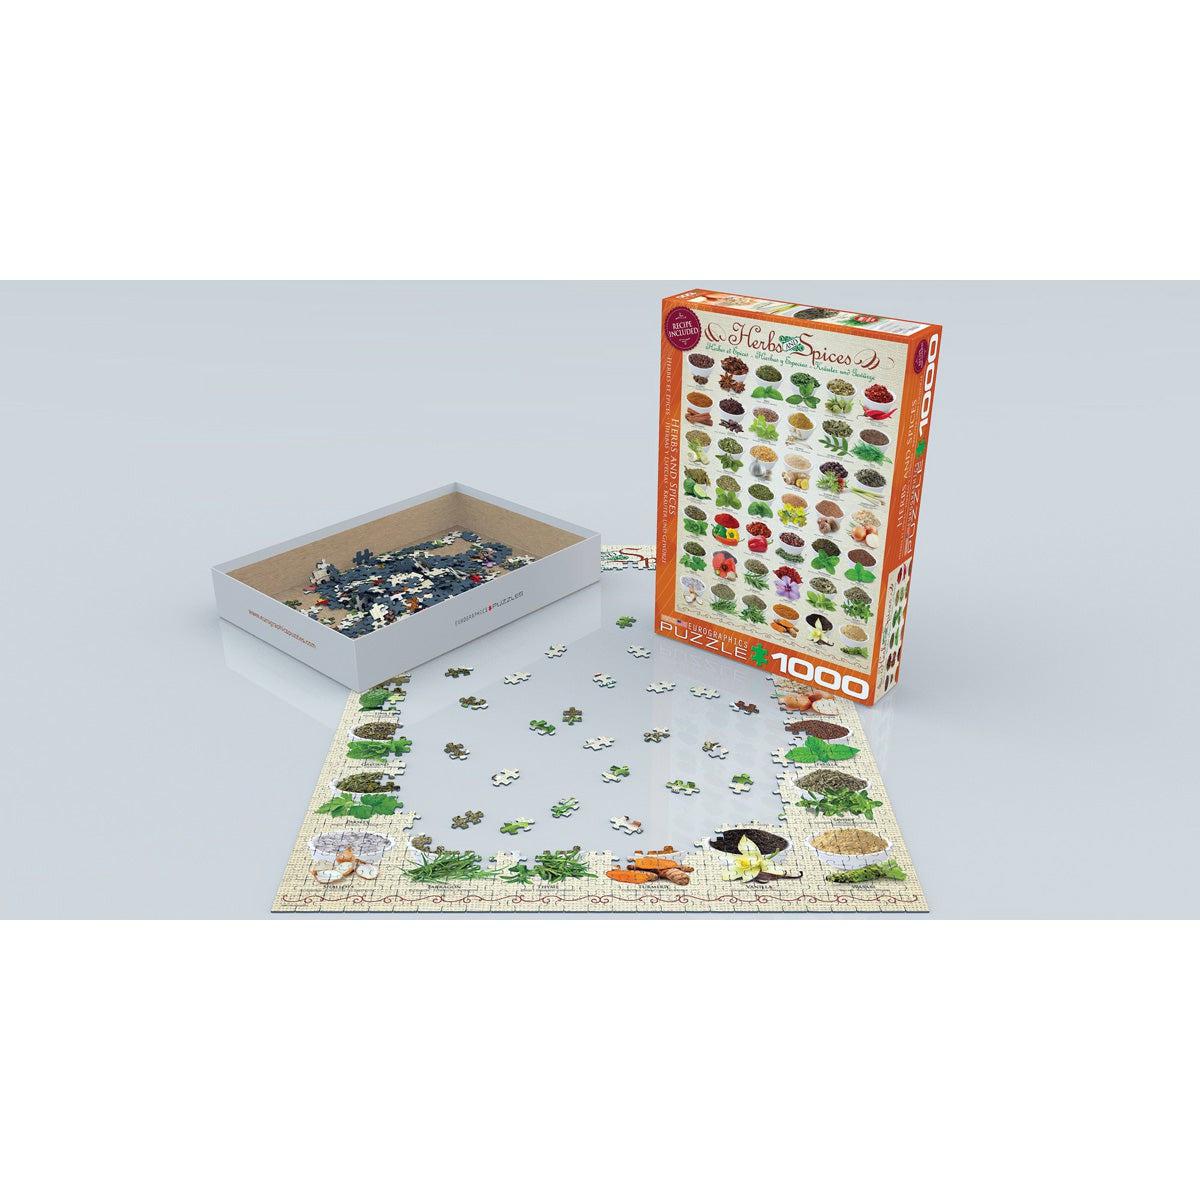 Herbs & Spices 1000 Piece Jigsaw Puzzle Eurographics